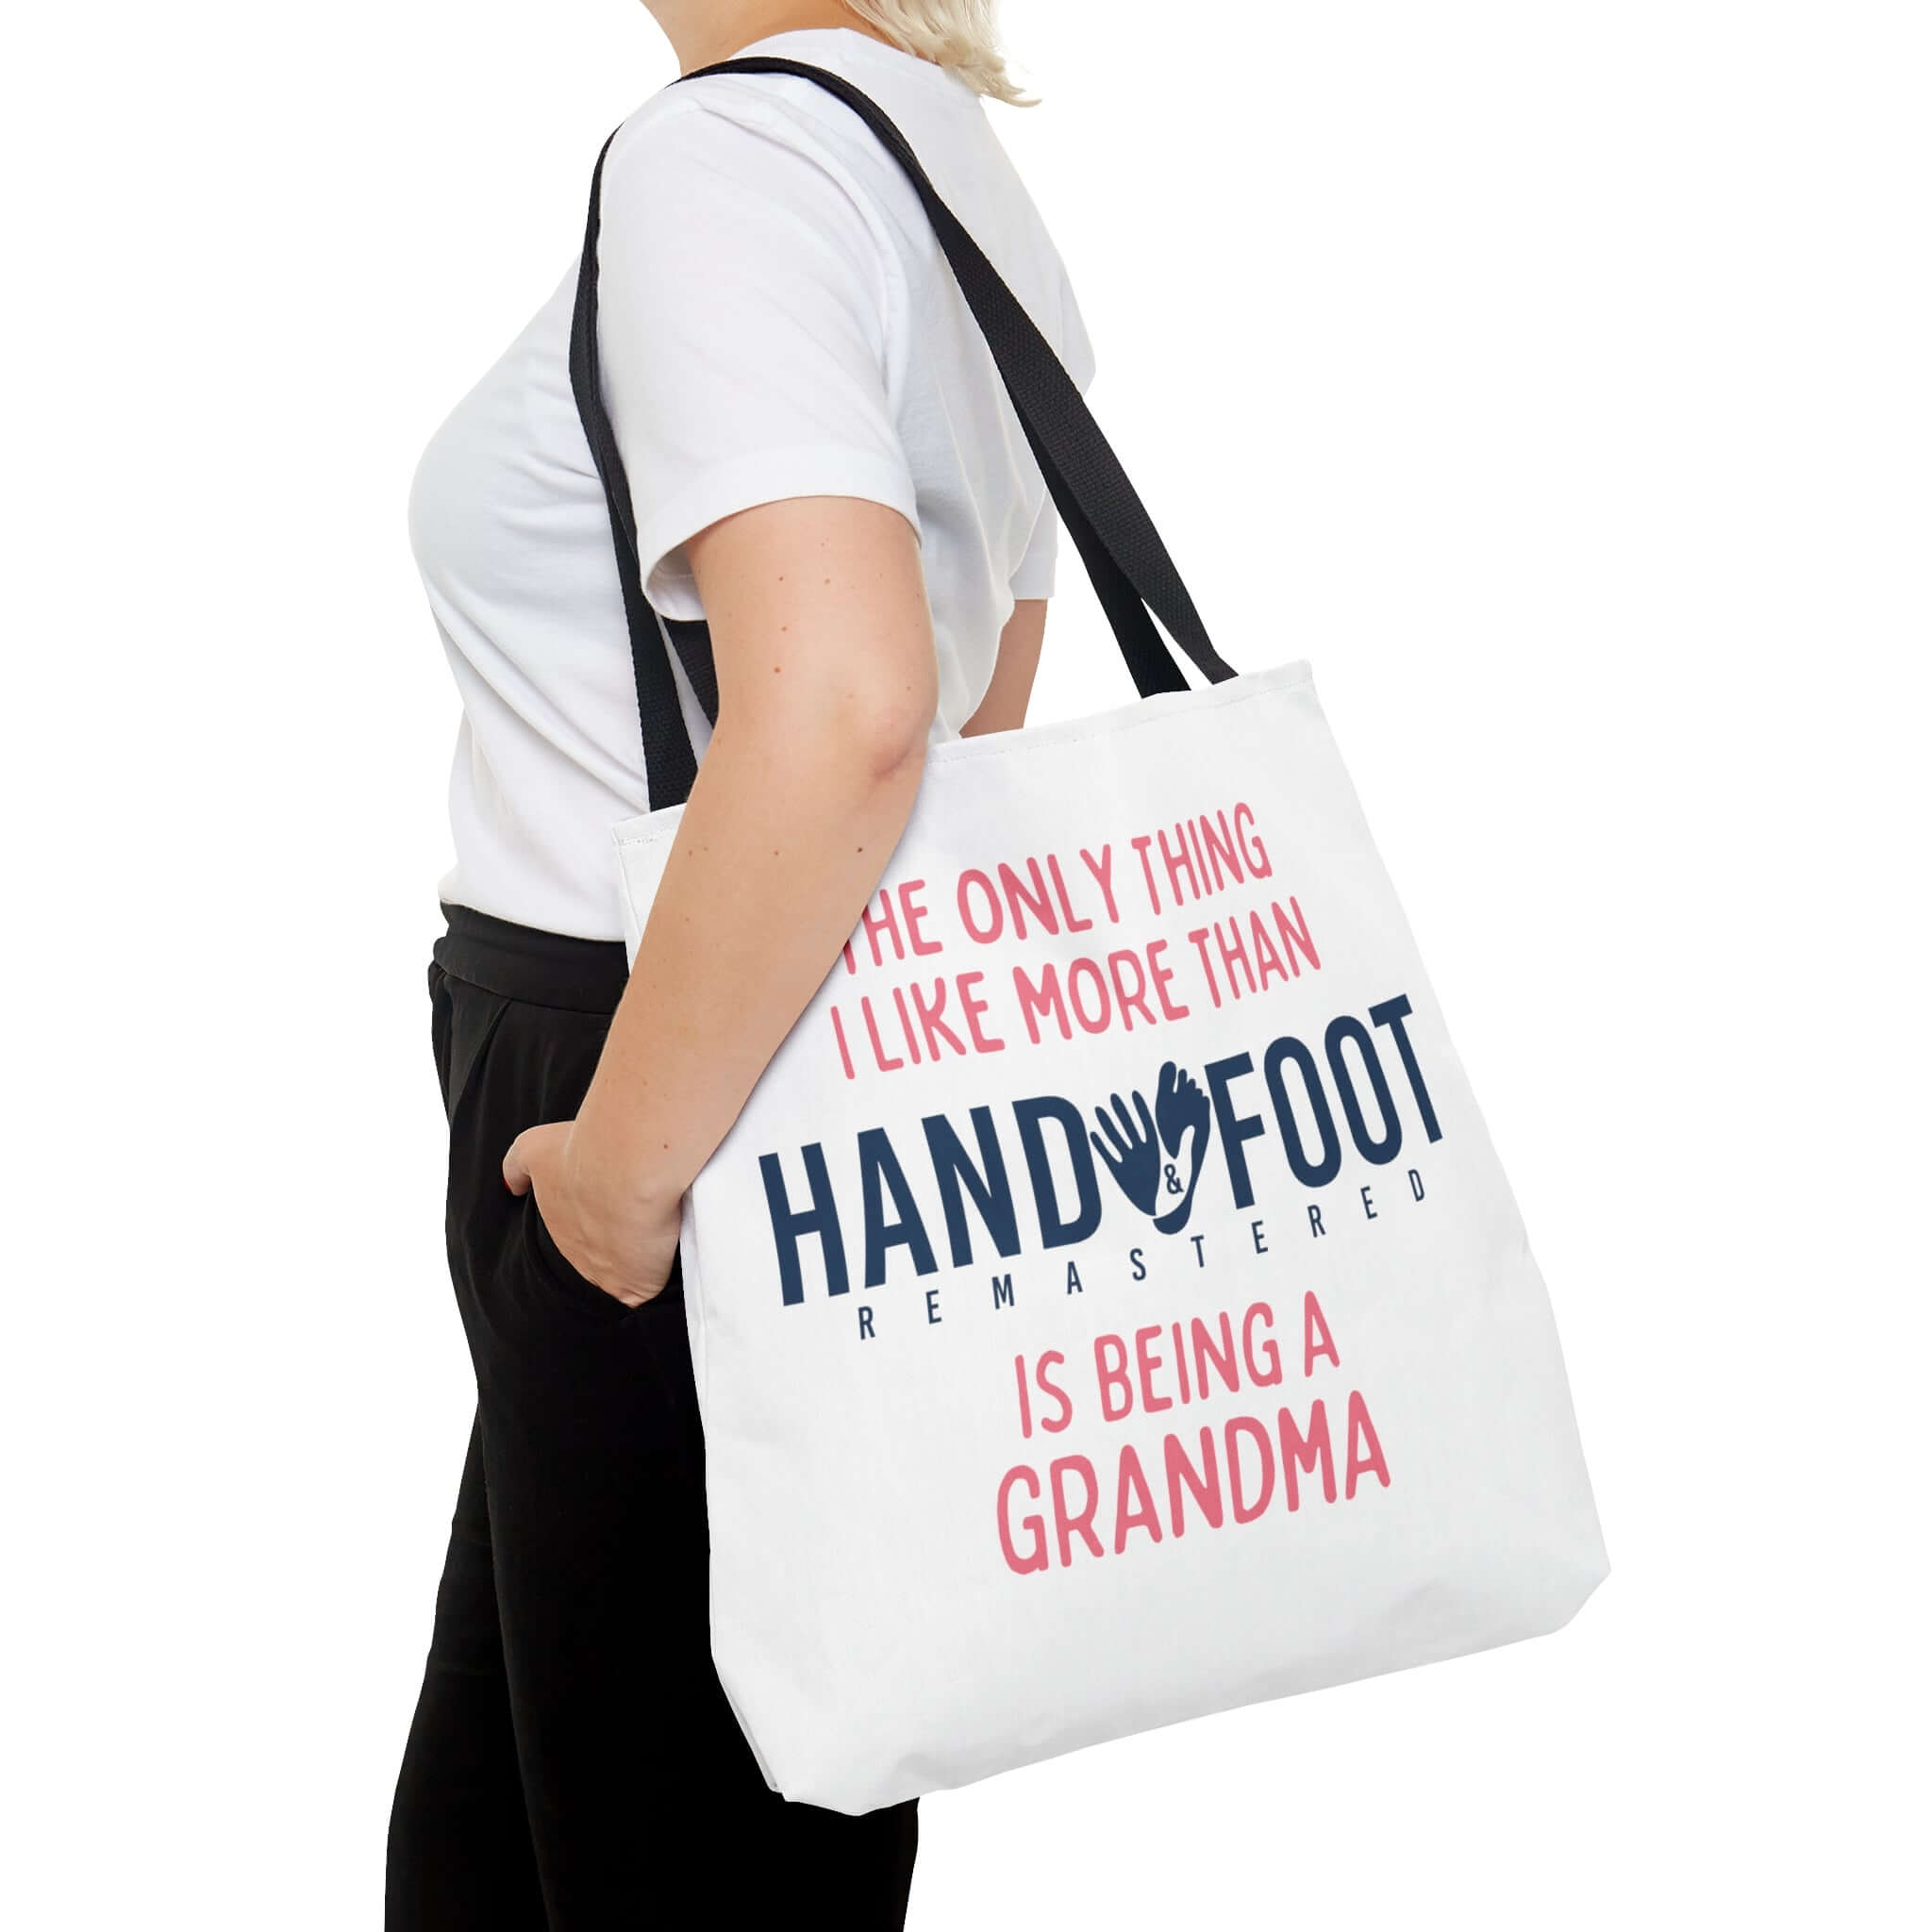 Being a Grandma Hand & Foot Remastered Polyester Tote Bag - 2 Sizes